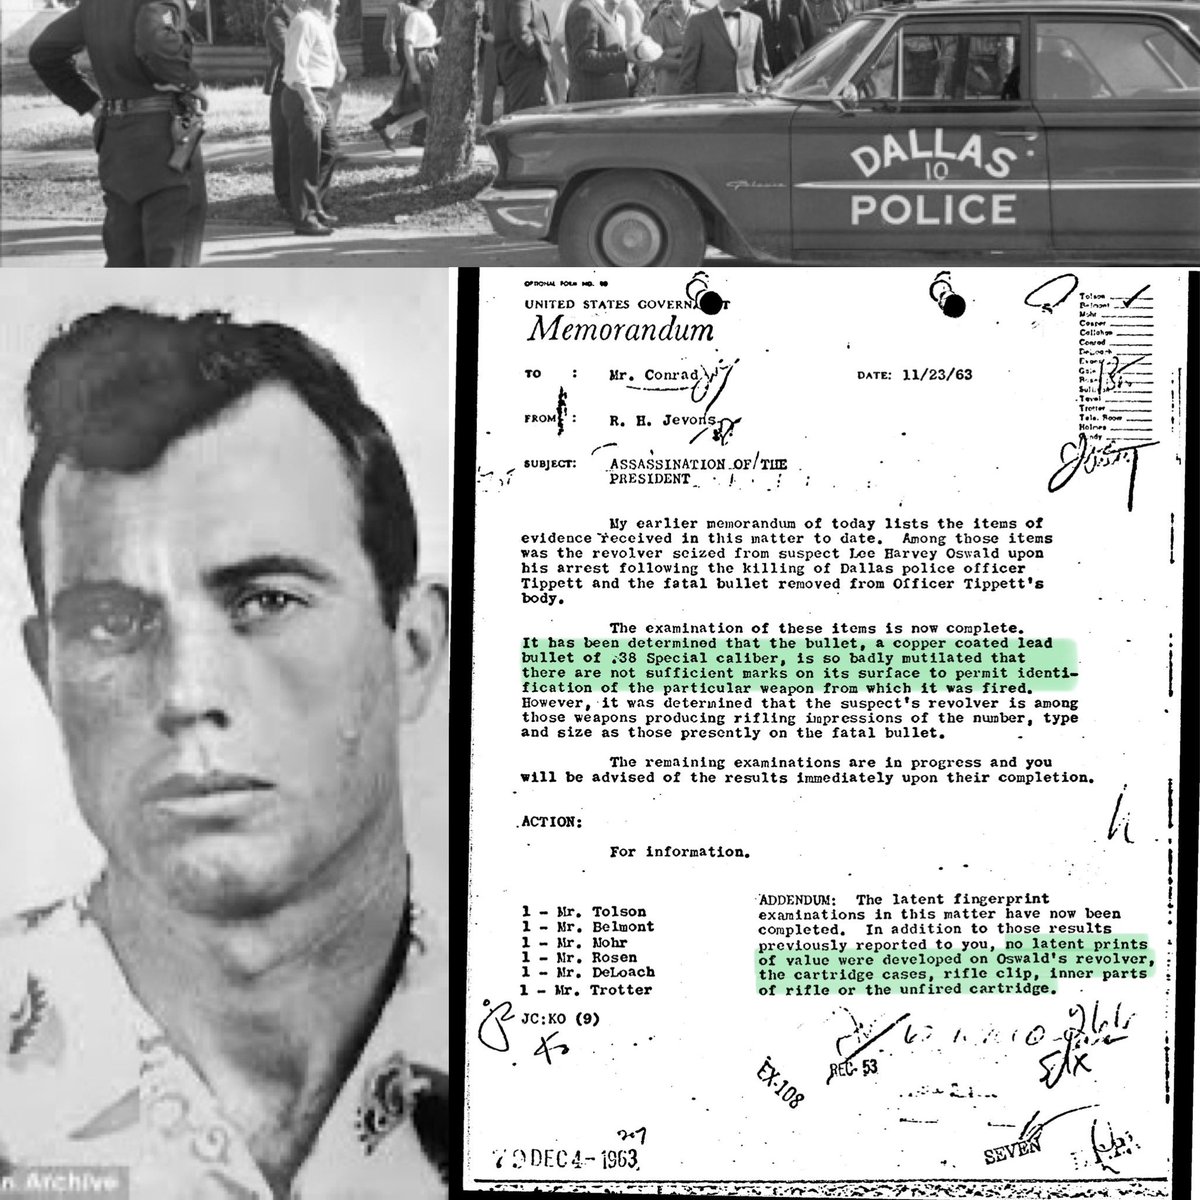 #FBI memo of 11/23/63 pertaining to analysis of the bullet removed from Officer Tippit and fingerprint examinations of the rifle and pistol allegedly used by Oswald. #JFKFiles #CIA #JFKA maryferrell.org/showDoc.html?d…